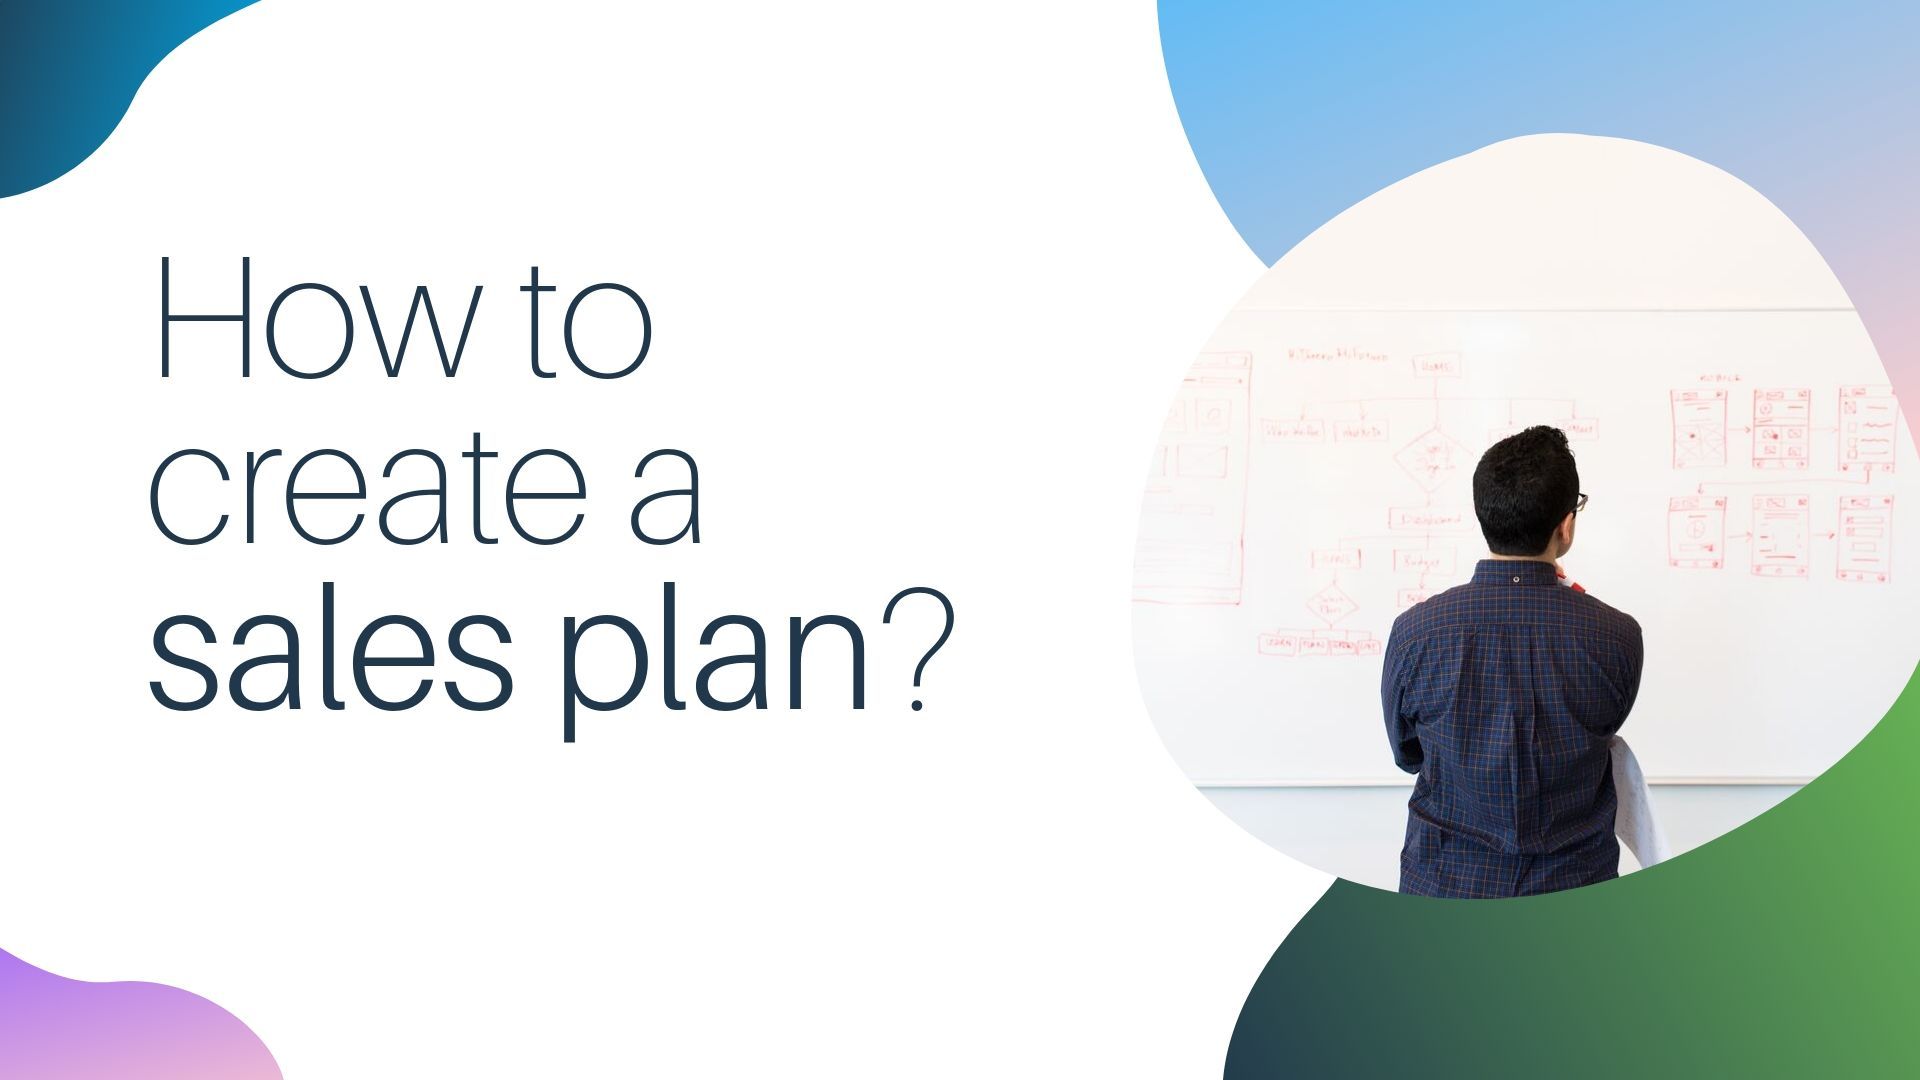 How to create a sales plan?